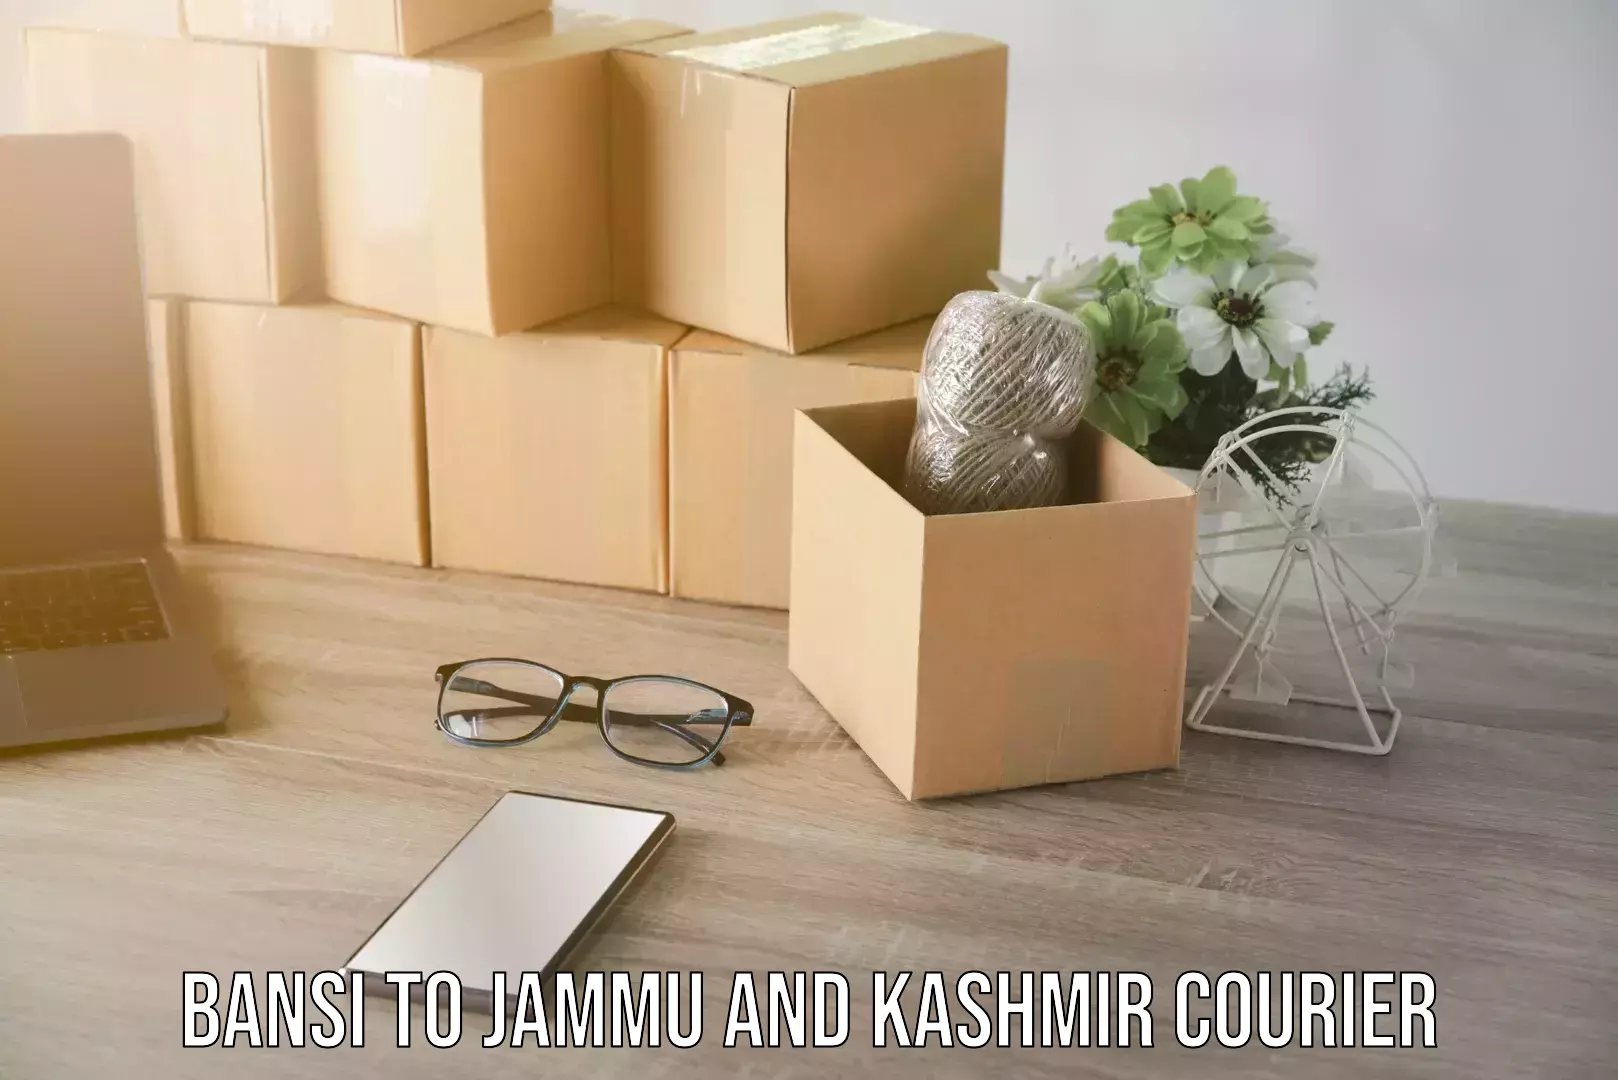 On-call courier service Bansi to Jammu and Kashmir